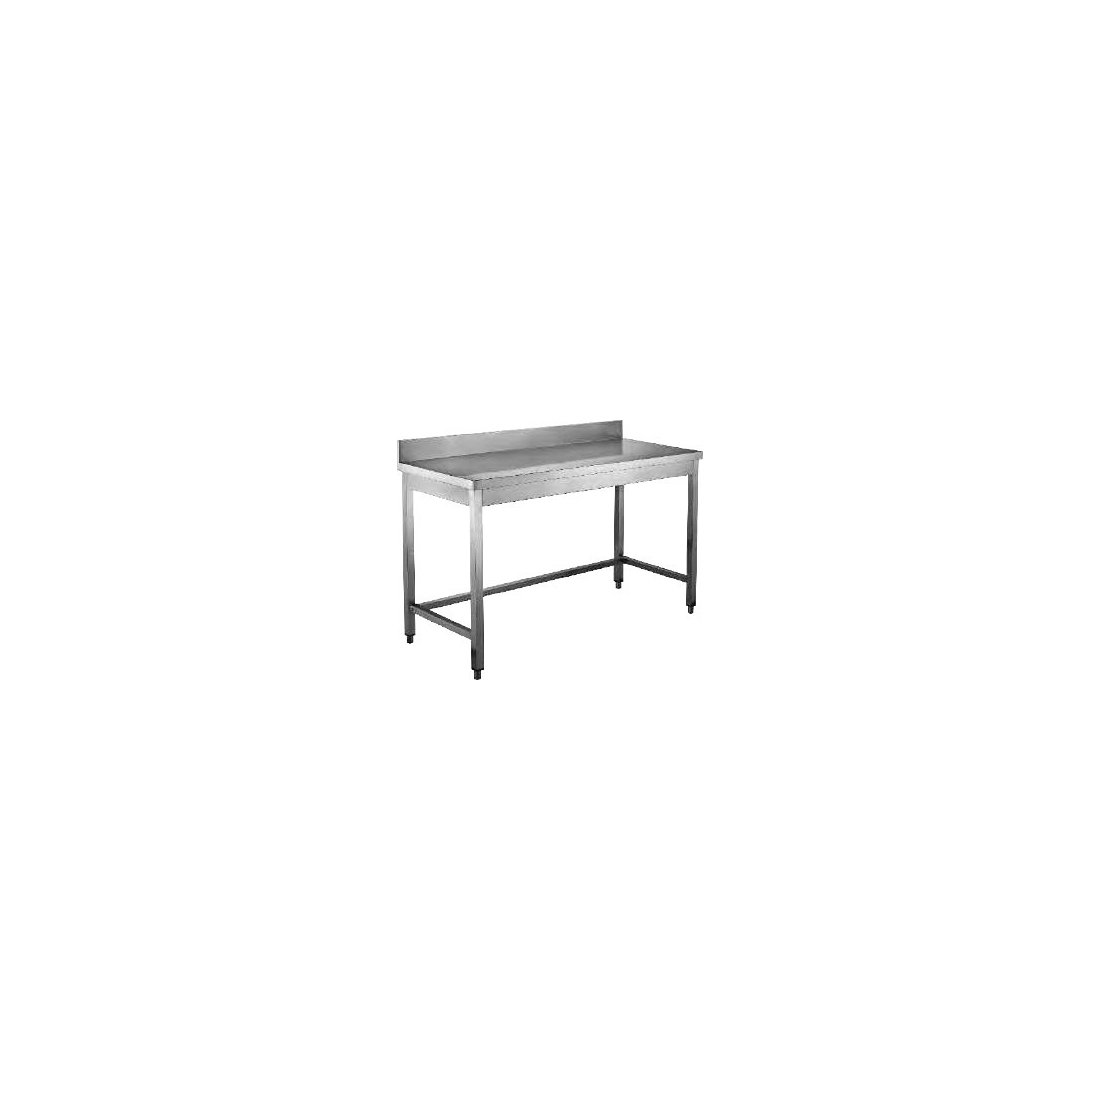 Stainless Steel Service Table with backsplash 1m (WTD-101B)